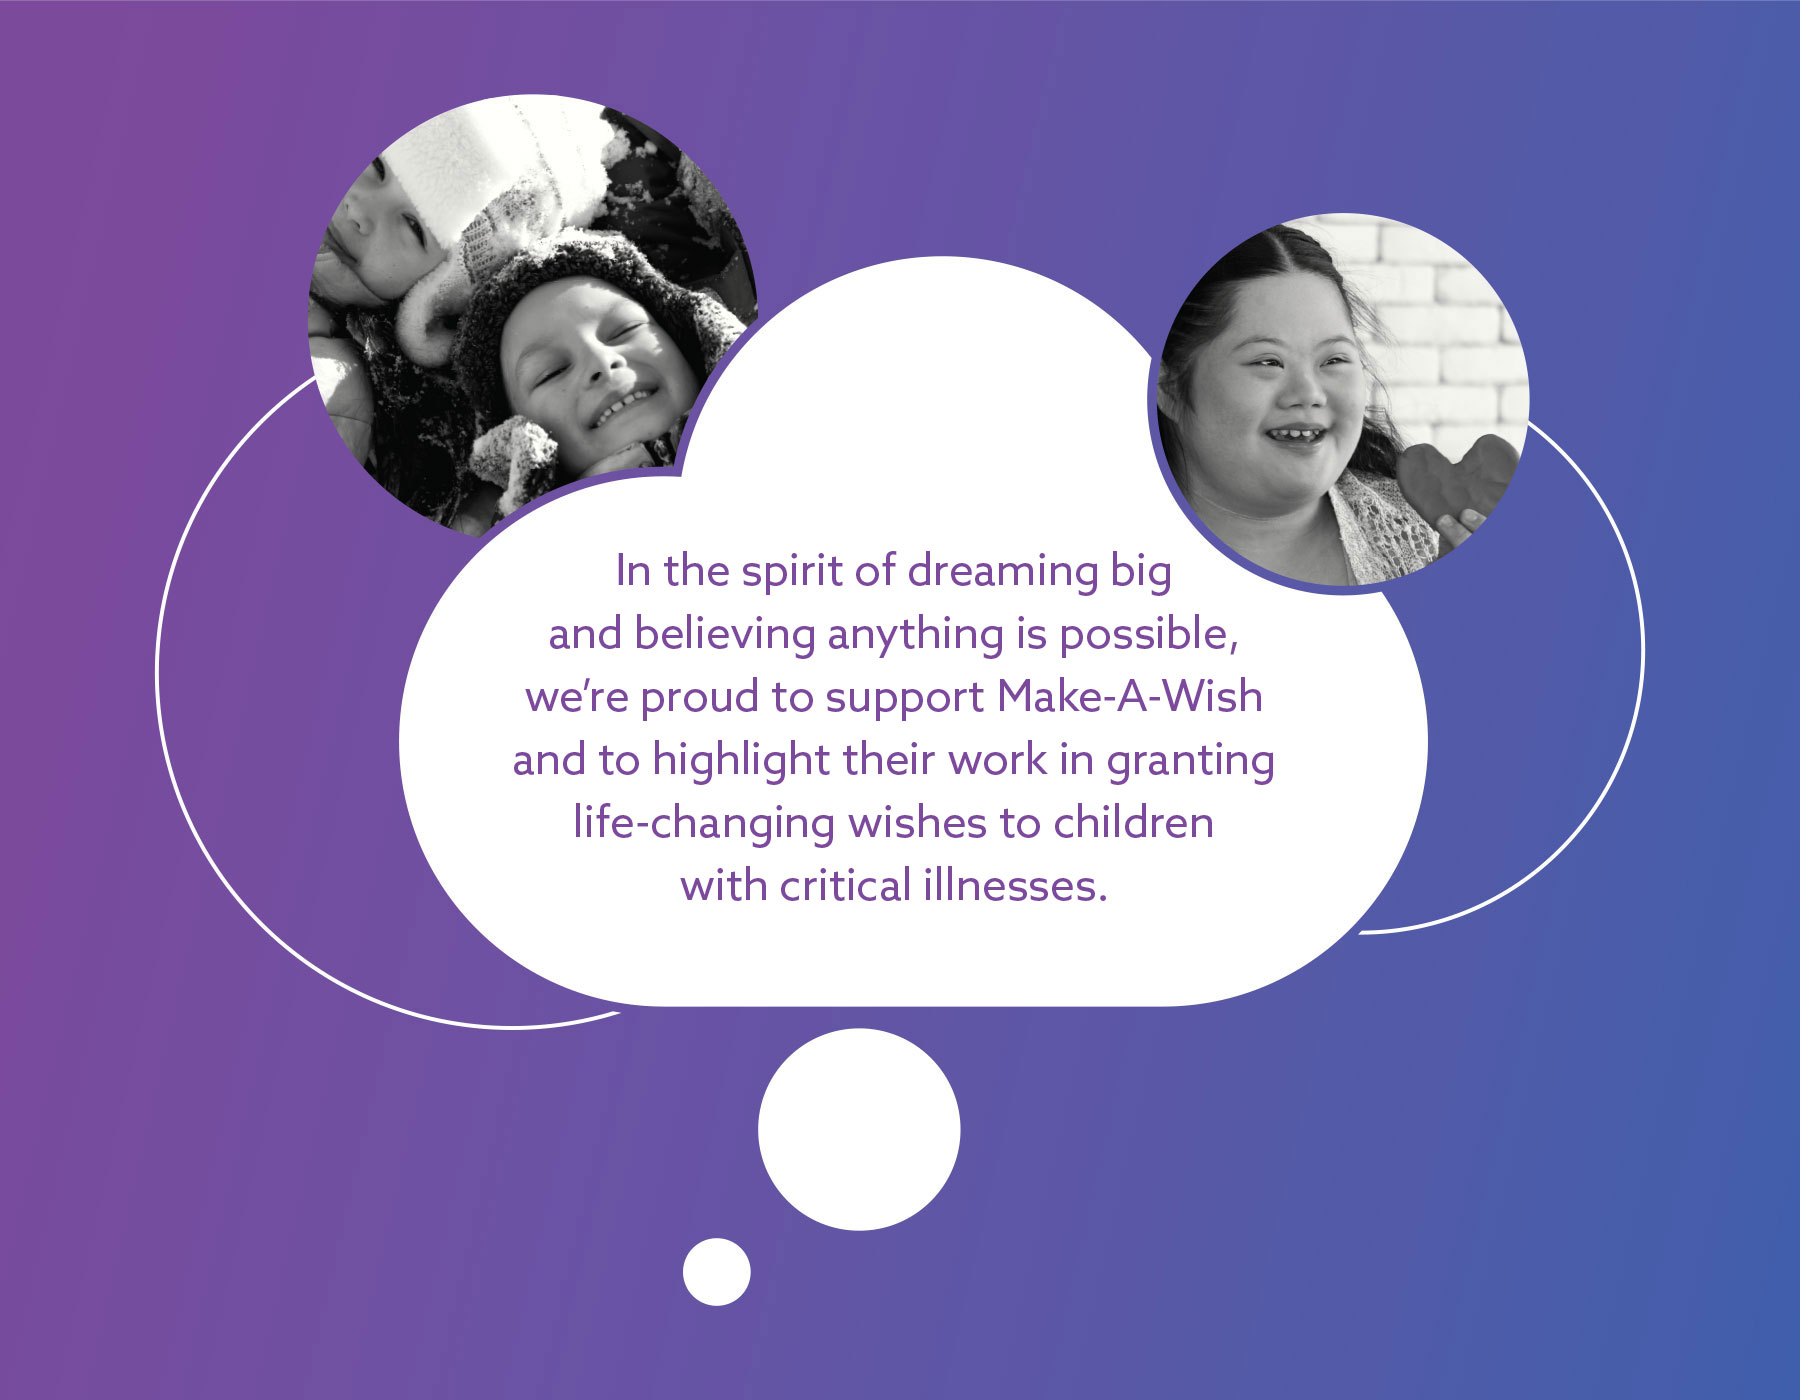 In the spirit of dreaming big and believing anything is possible, we're proud to support Make-A-Wish and to highlight their work in granting life-changing wishes to children with critical illnesses.